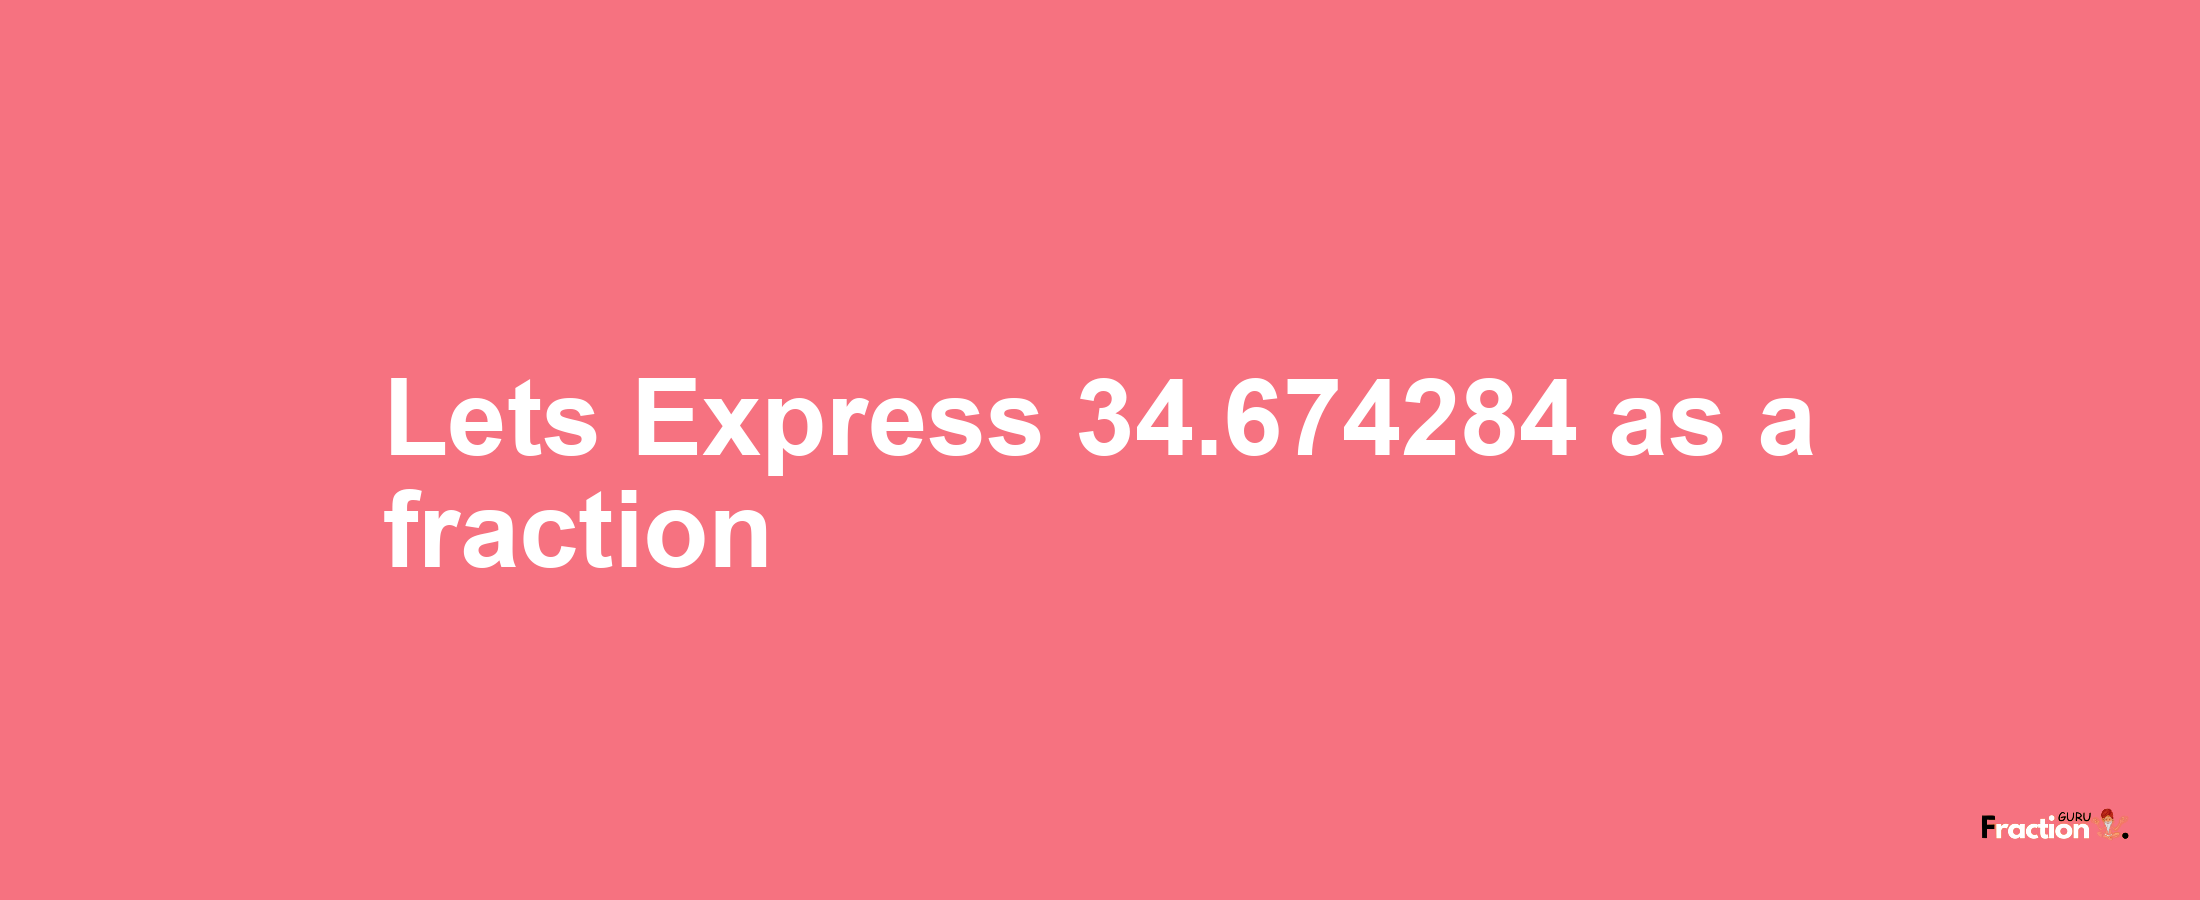 Lets Express 34.674284 as afraction